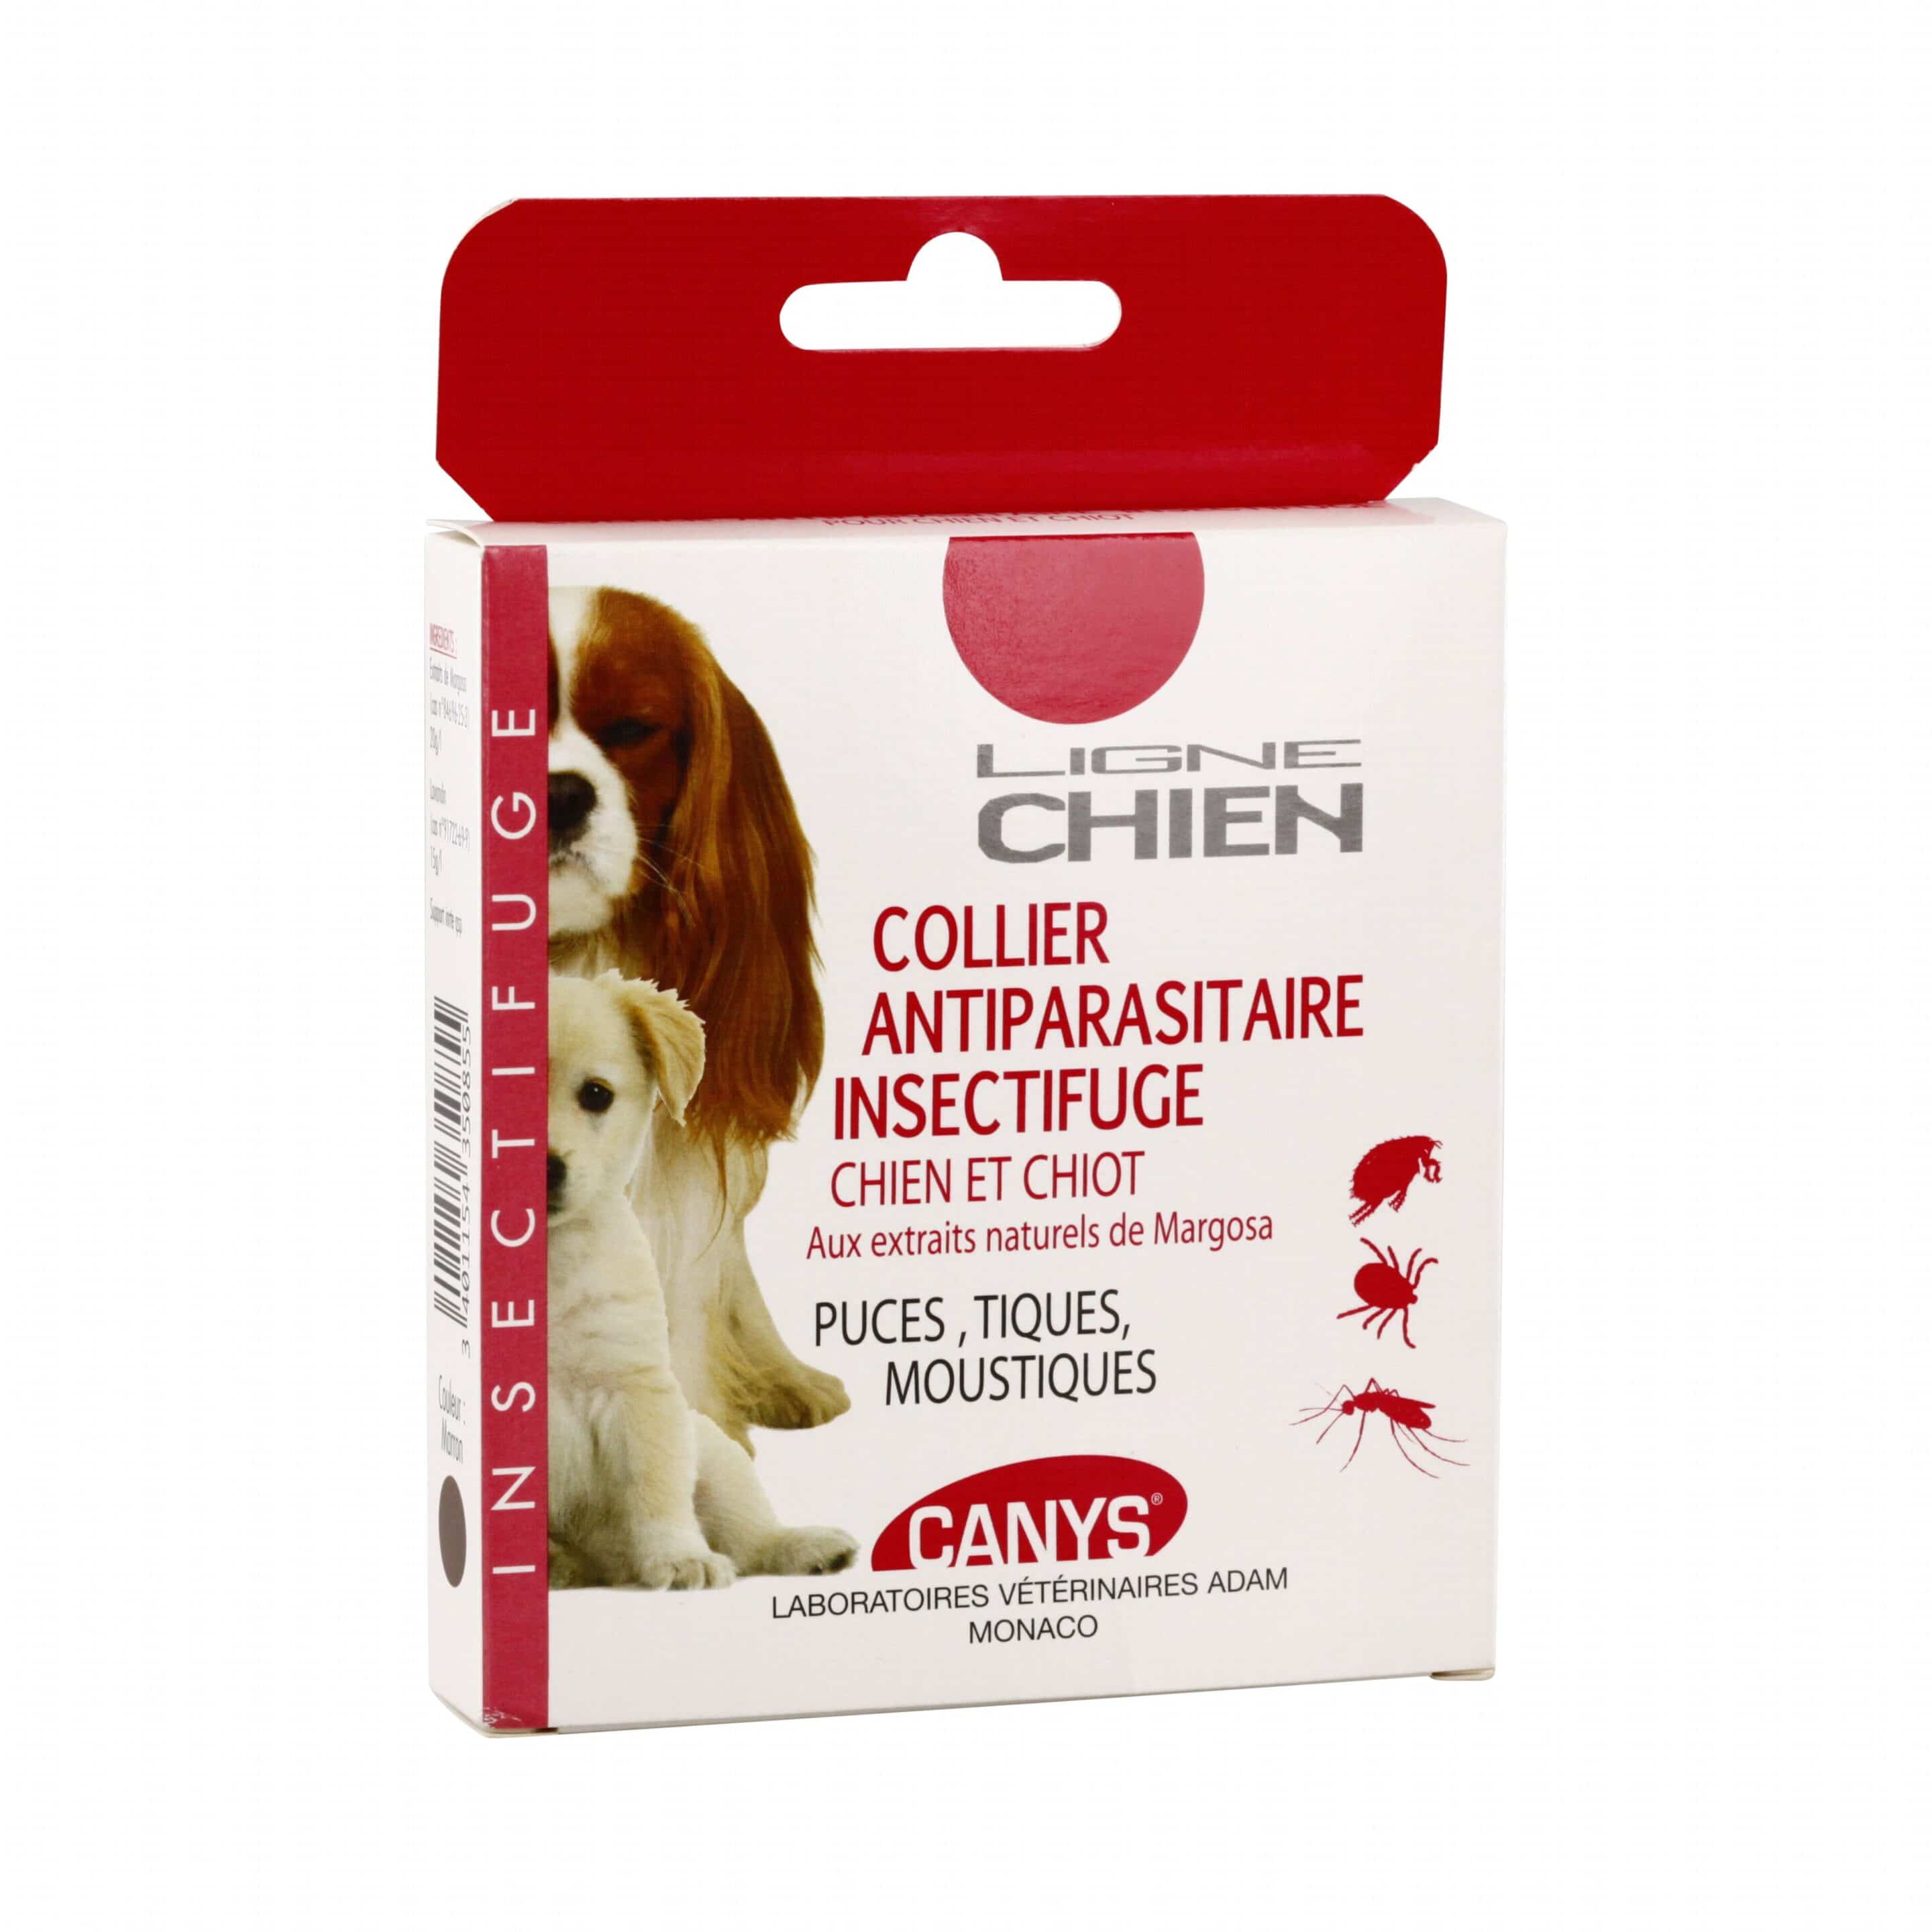 Canys Ligne Chien Collier Antiparasitaire Insectifuge chien/chiot